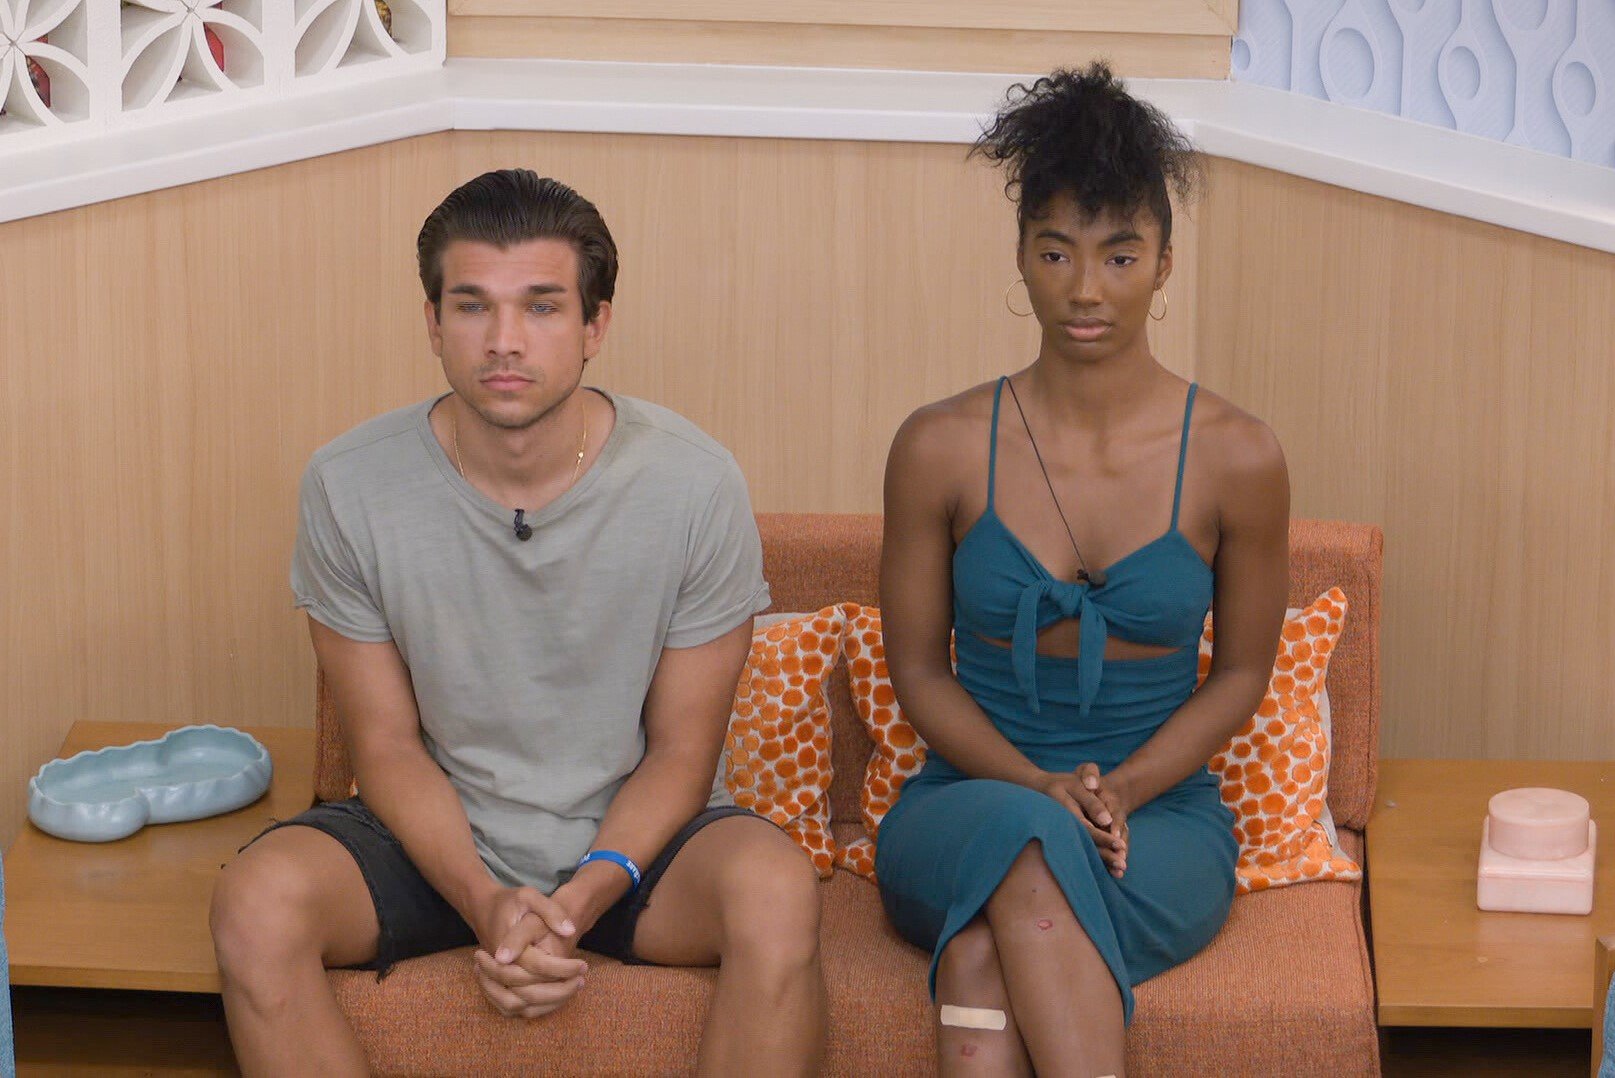 Joe 'Pooch' Pucciarelli and Taylor Hale sit in the nomination chair in the Big Brother house. Pooch wears a light gray shirt over dark gray pants. Taylor wears a teal dress. Does a new episode of 'Big Brother 24' air tonight, July 21?